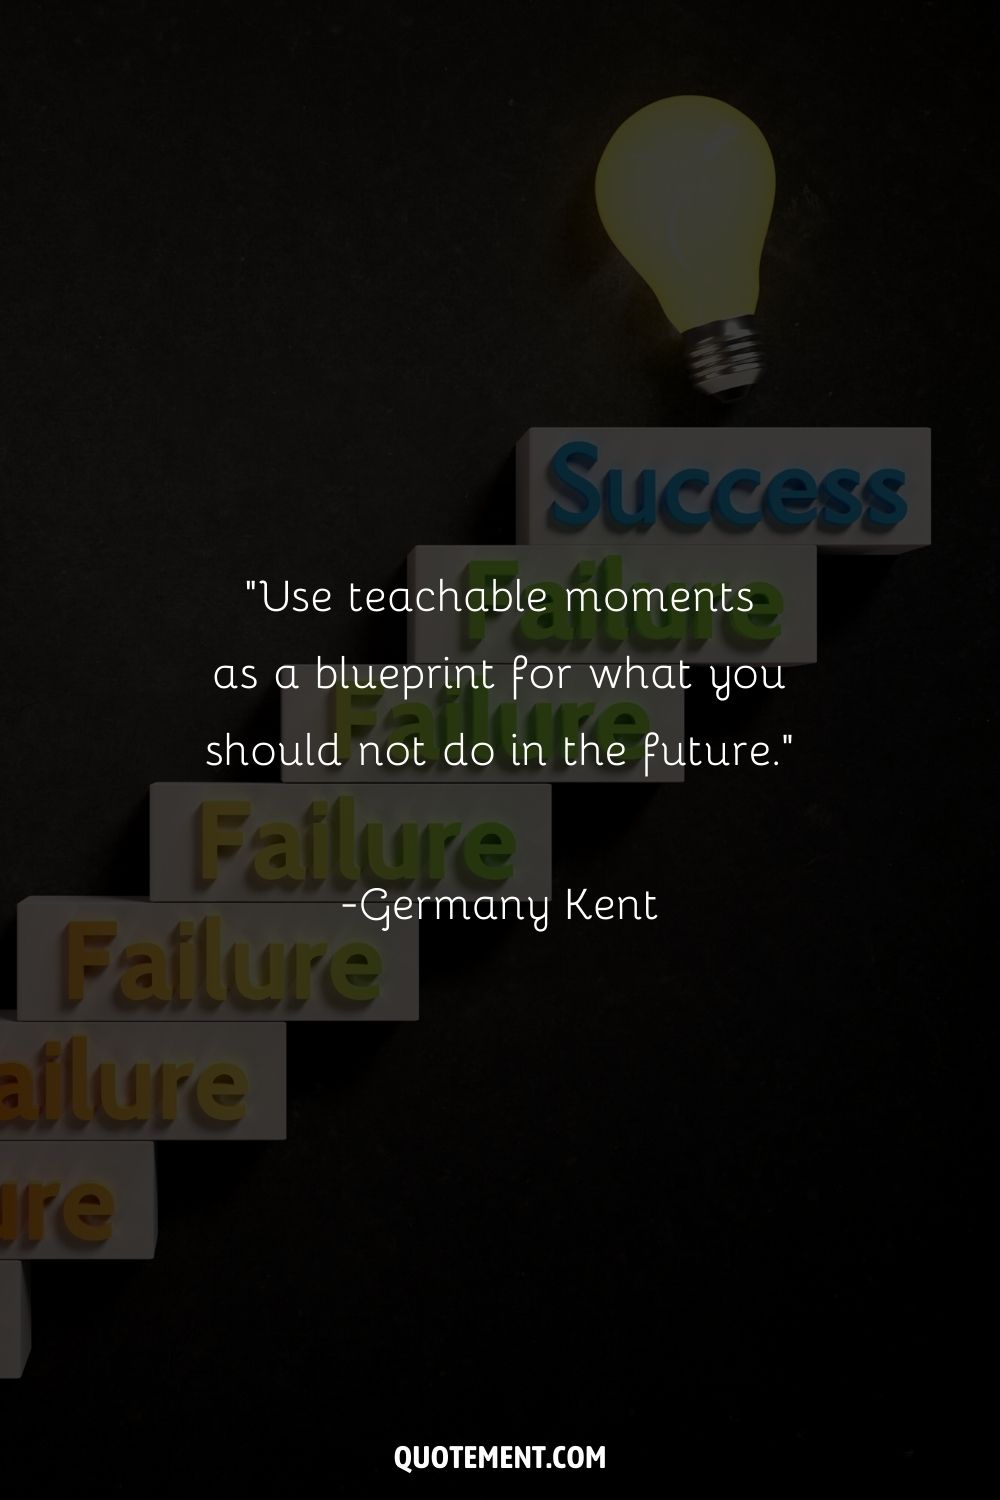 “Use teachable moments as a blueprint for what you should not do in the future.” ― Germany Kent